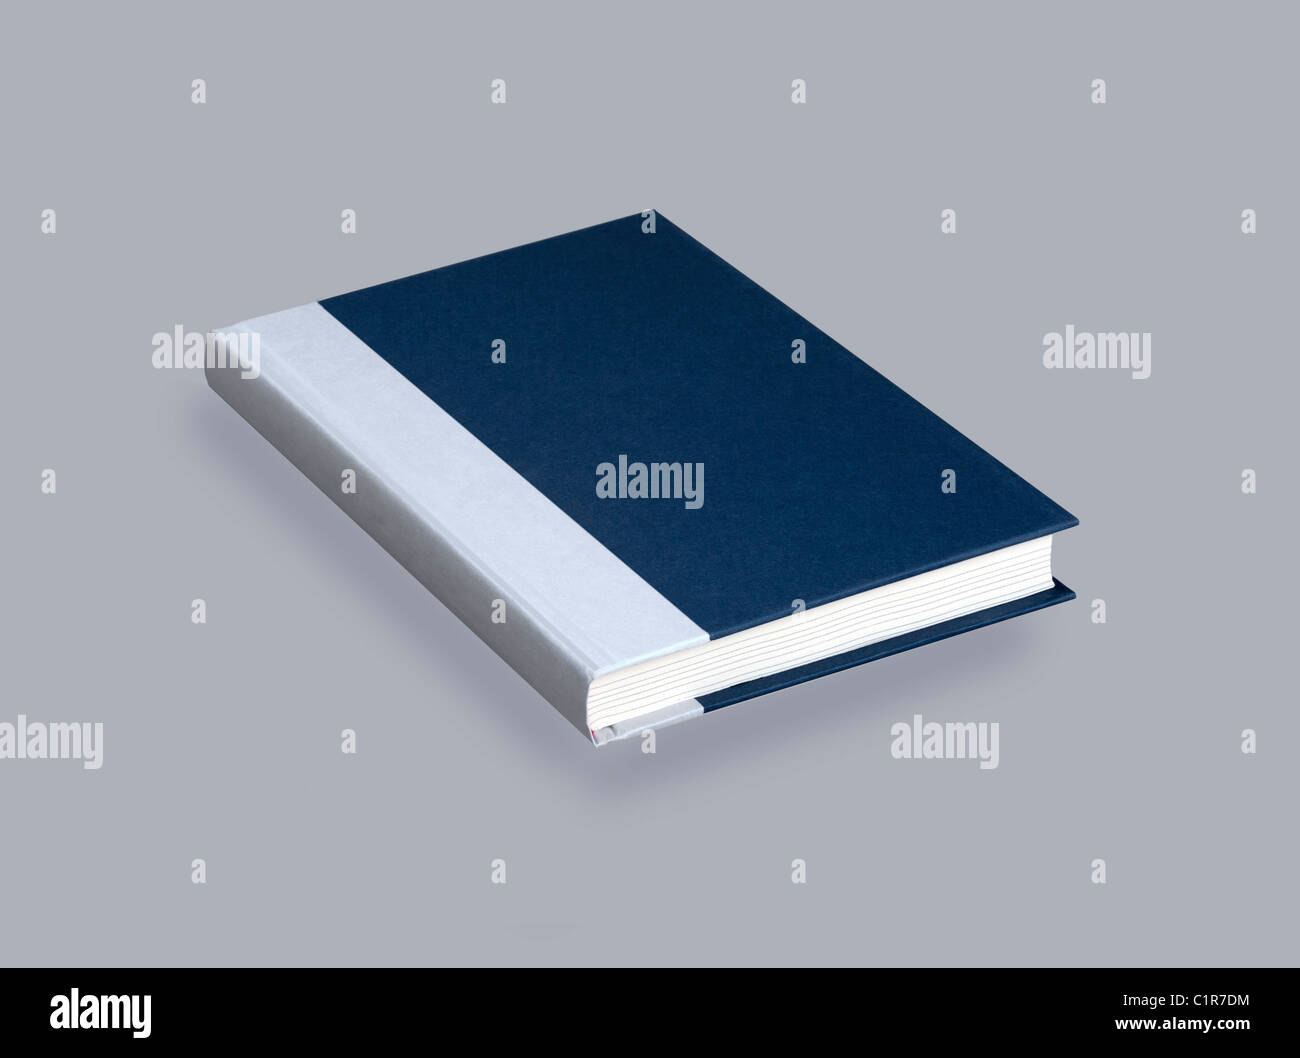 Plain blue book for design layout Stock Photo